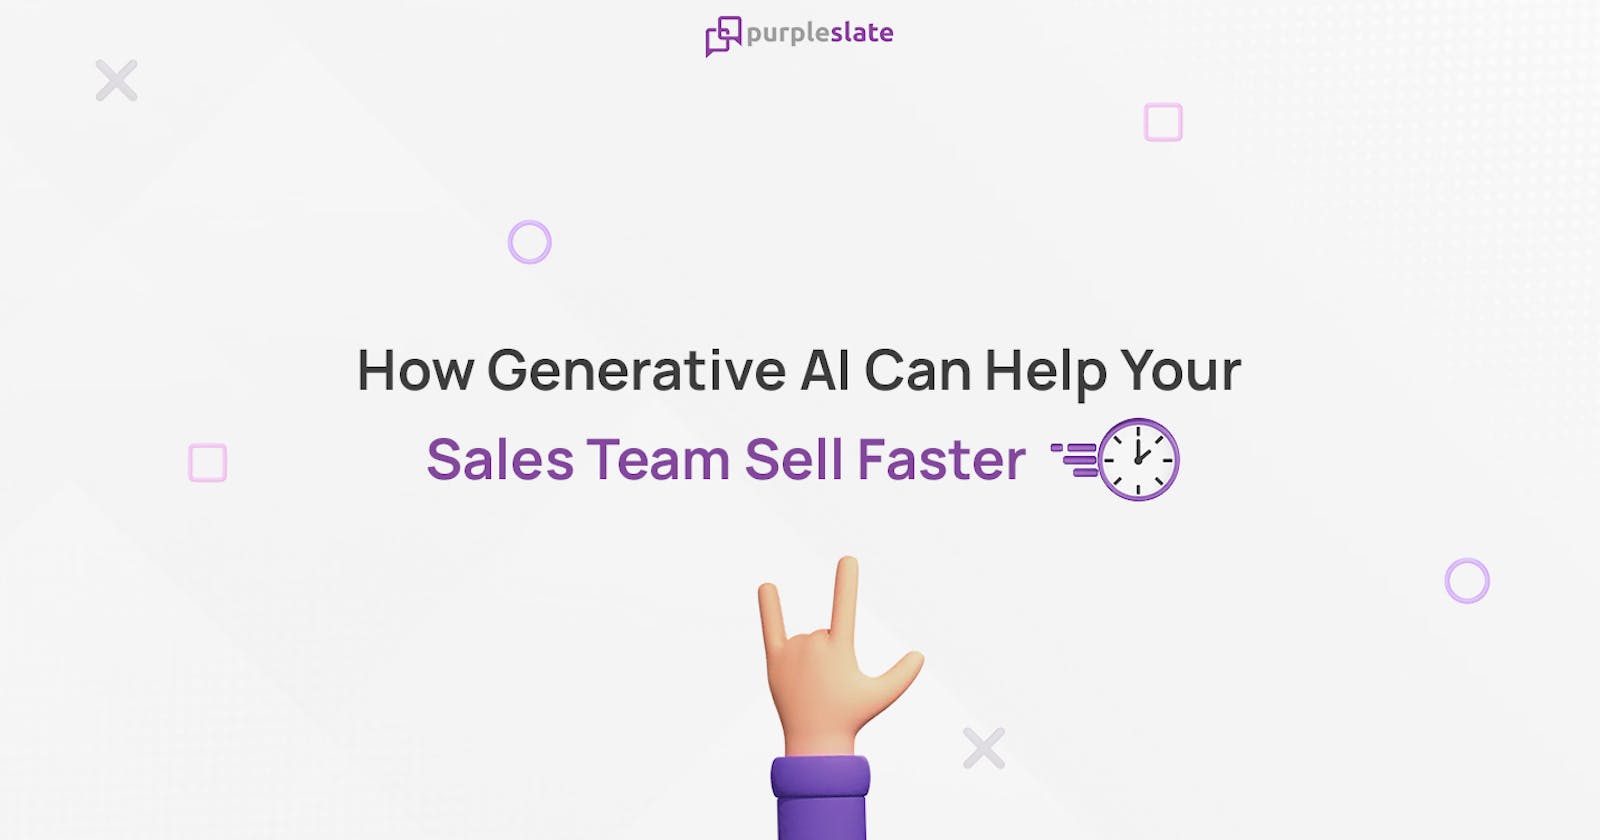 How Generative AI Can Help Your Sales Team Sell Faster